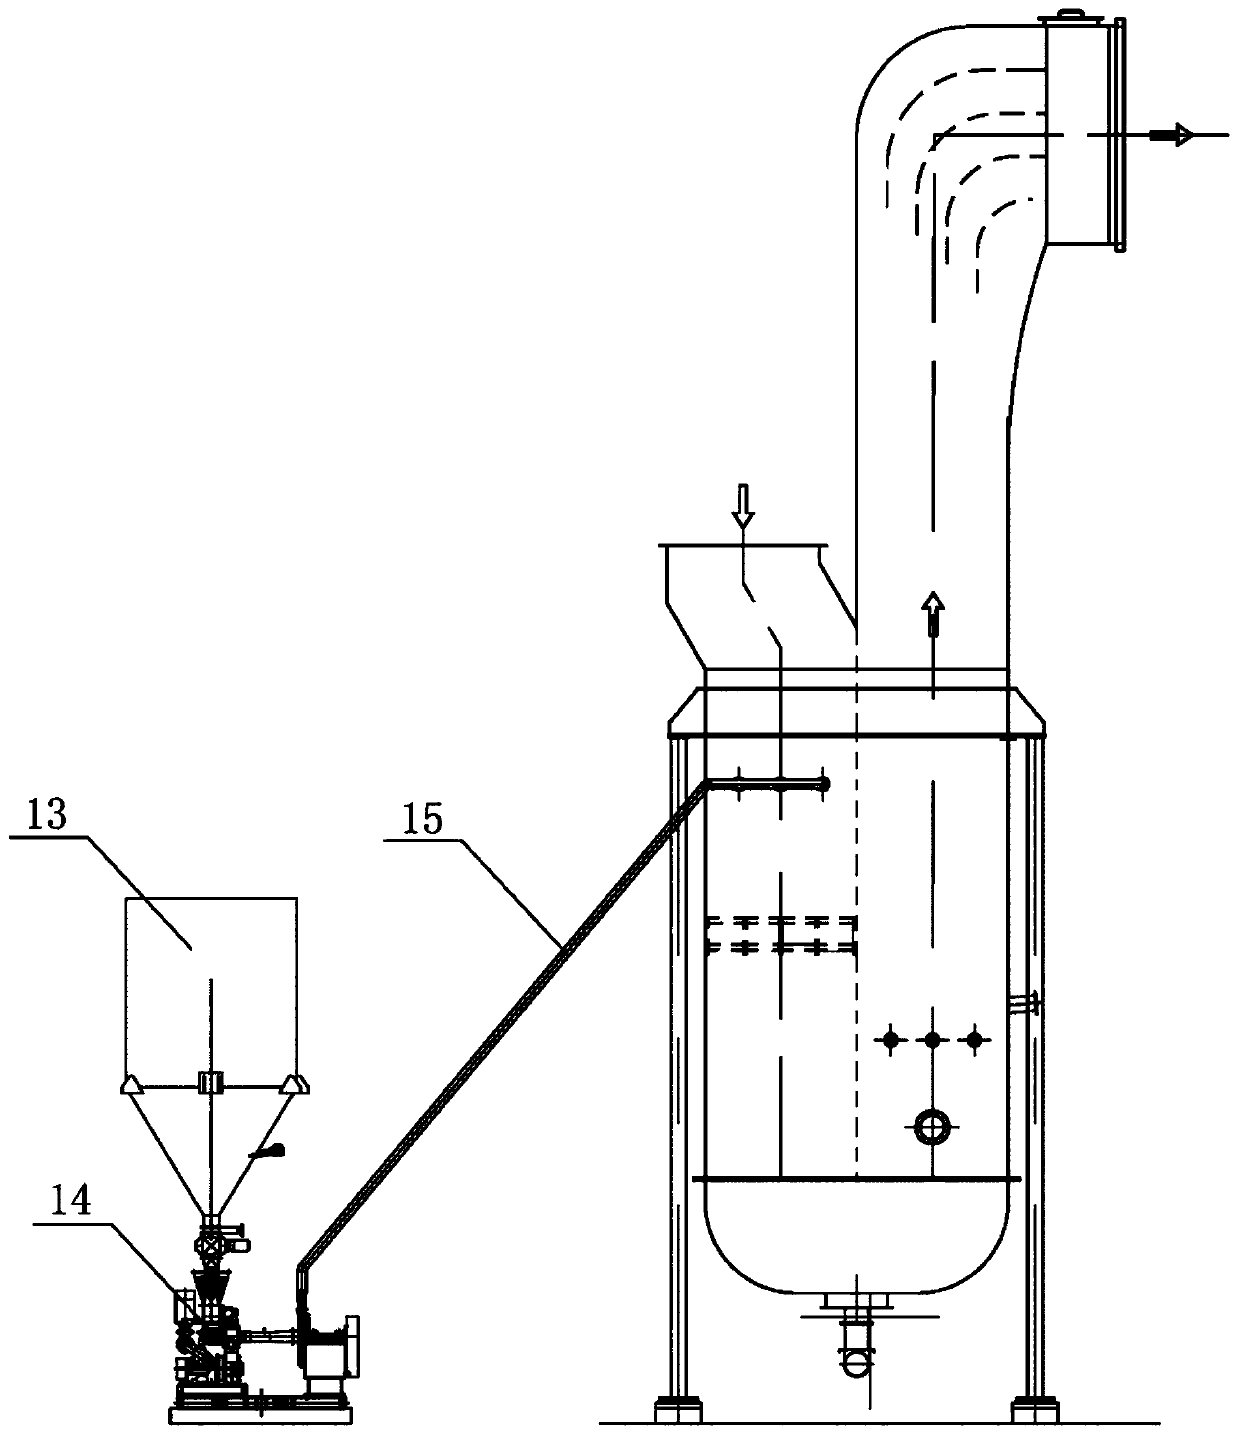 Dry desulfurization reaction device